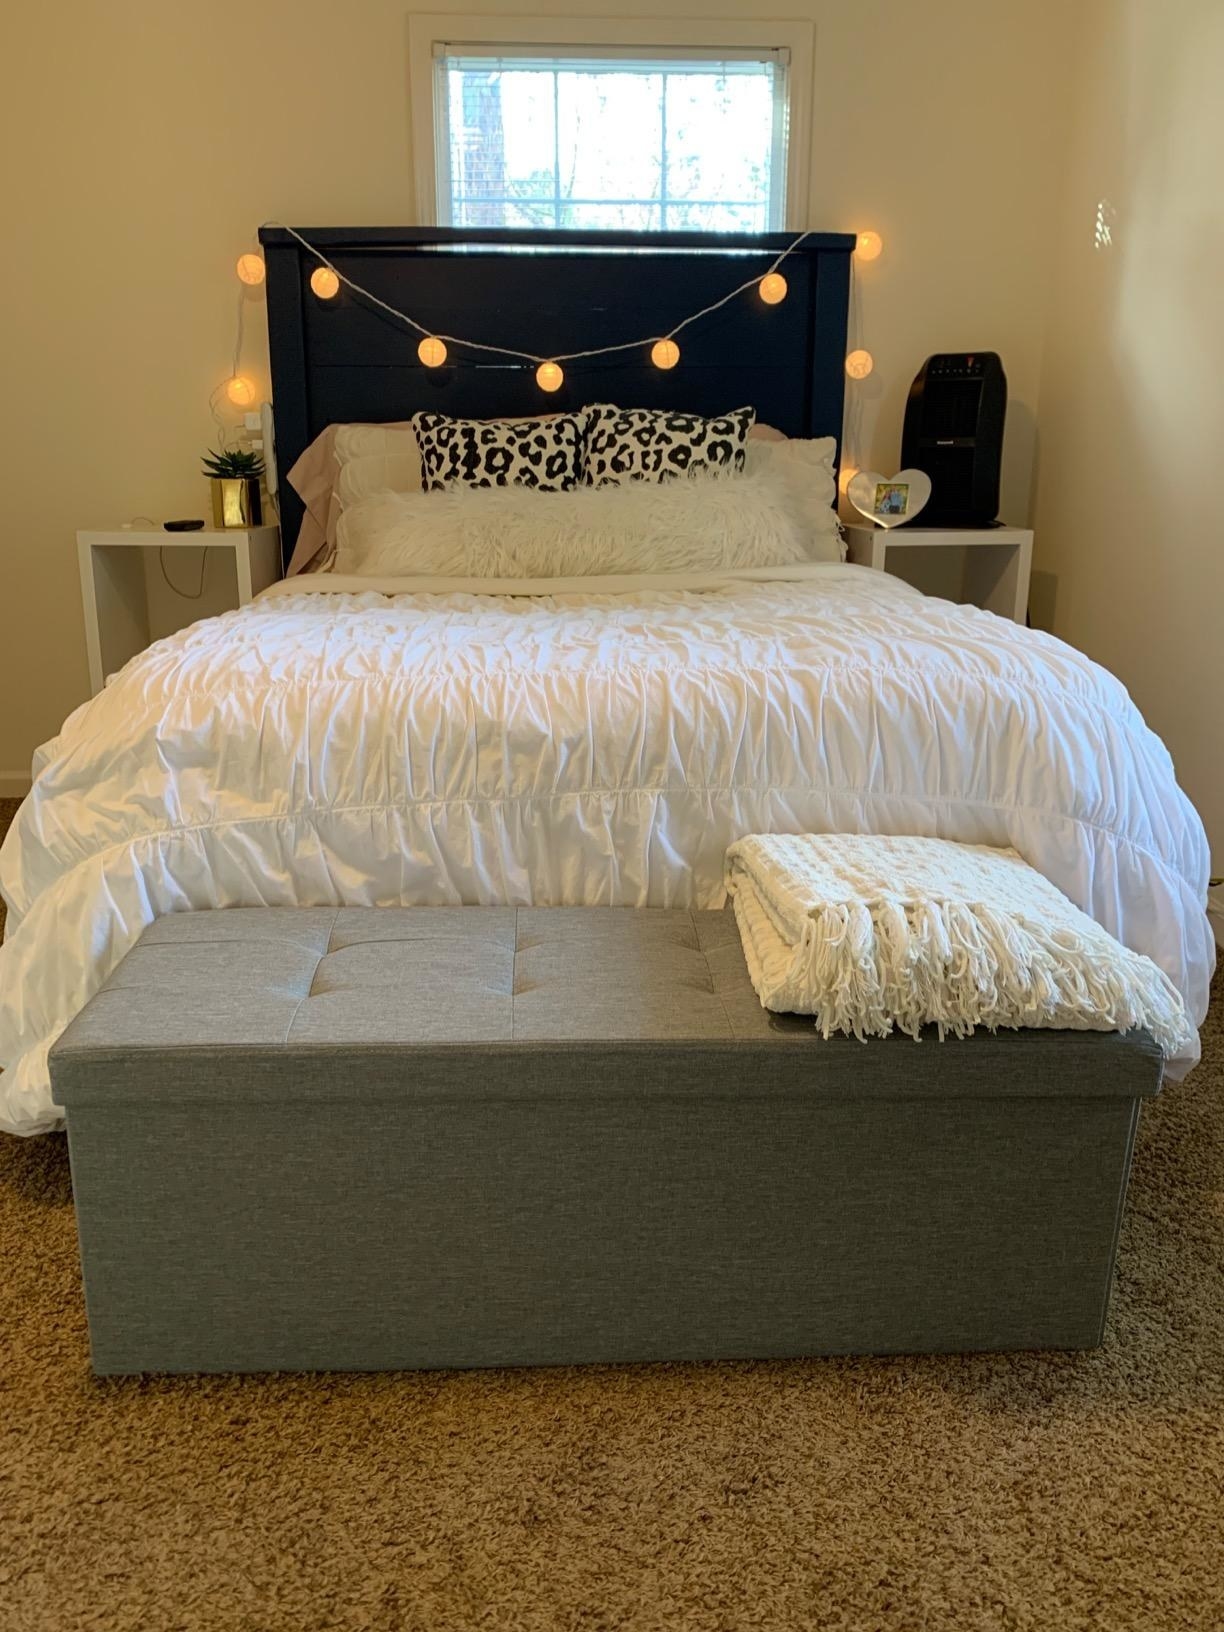 Reviewer image of gray ottoman at the end of the bed in a bedroom